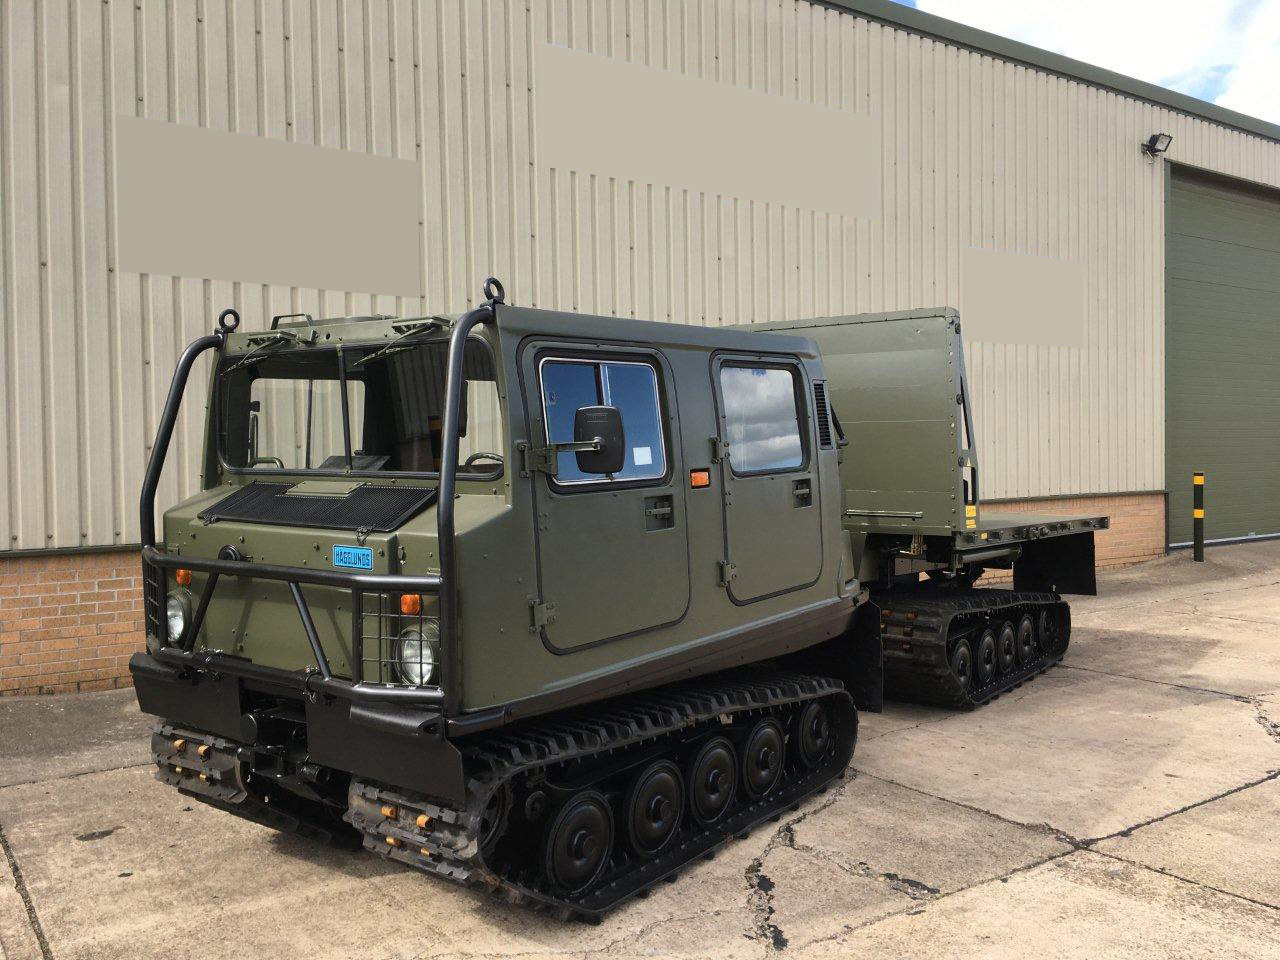 military vehicles for sale - <a href='/index.php/main-menu-stock/manufacturer/hagglunds/50303-hagglunds-bv206-load-carrier-with-crane' title='Read more...' class='joodb_titletink'>Hagglunds Bv206 Load Carrier with Crane</a>